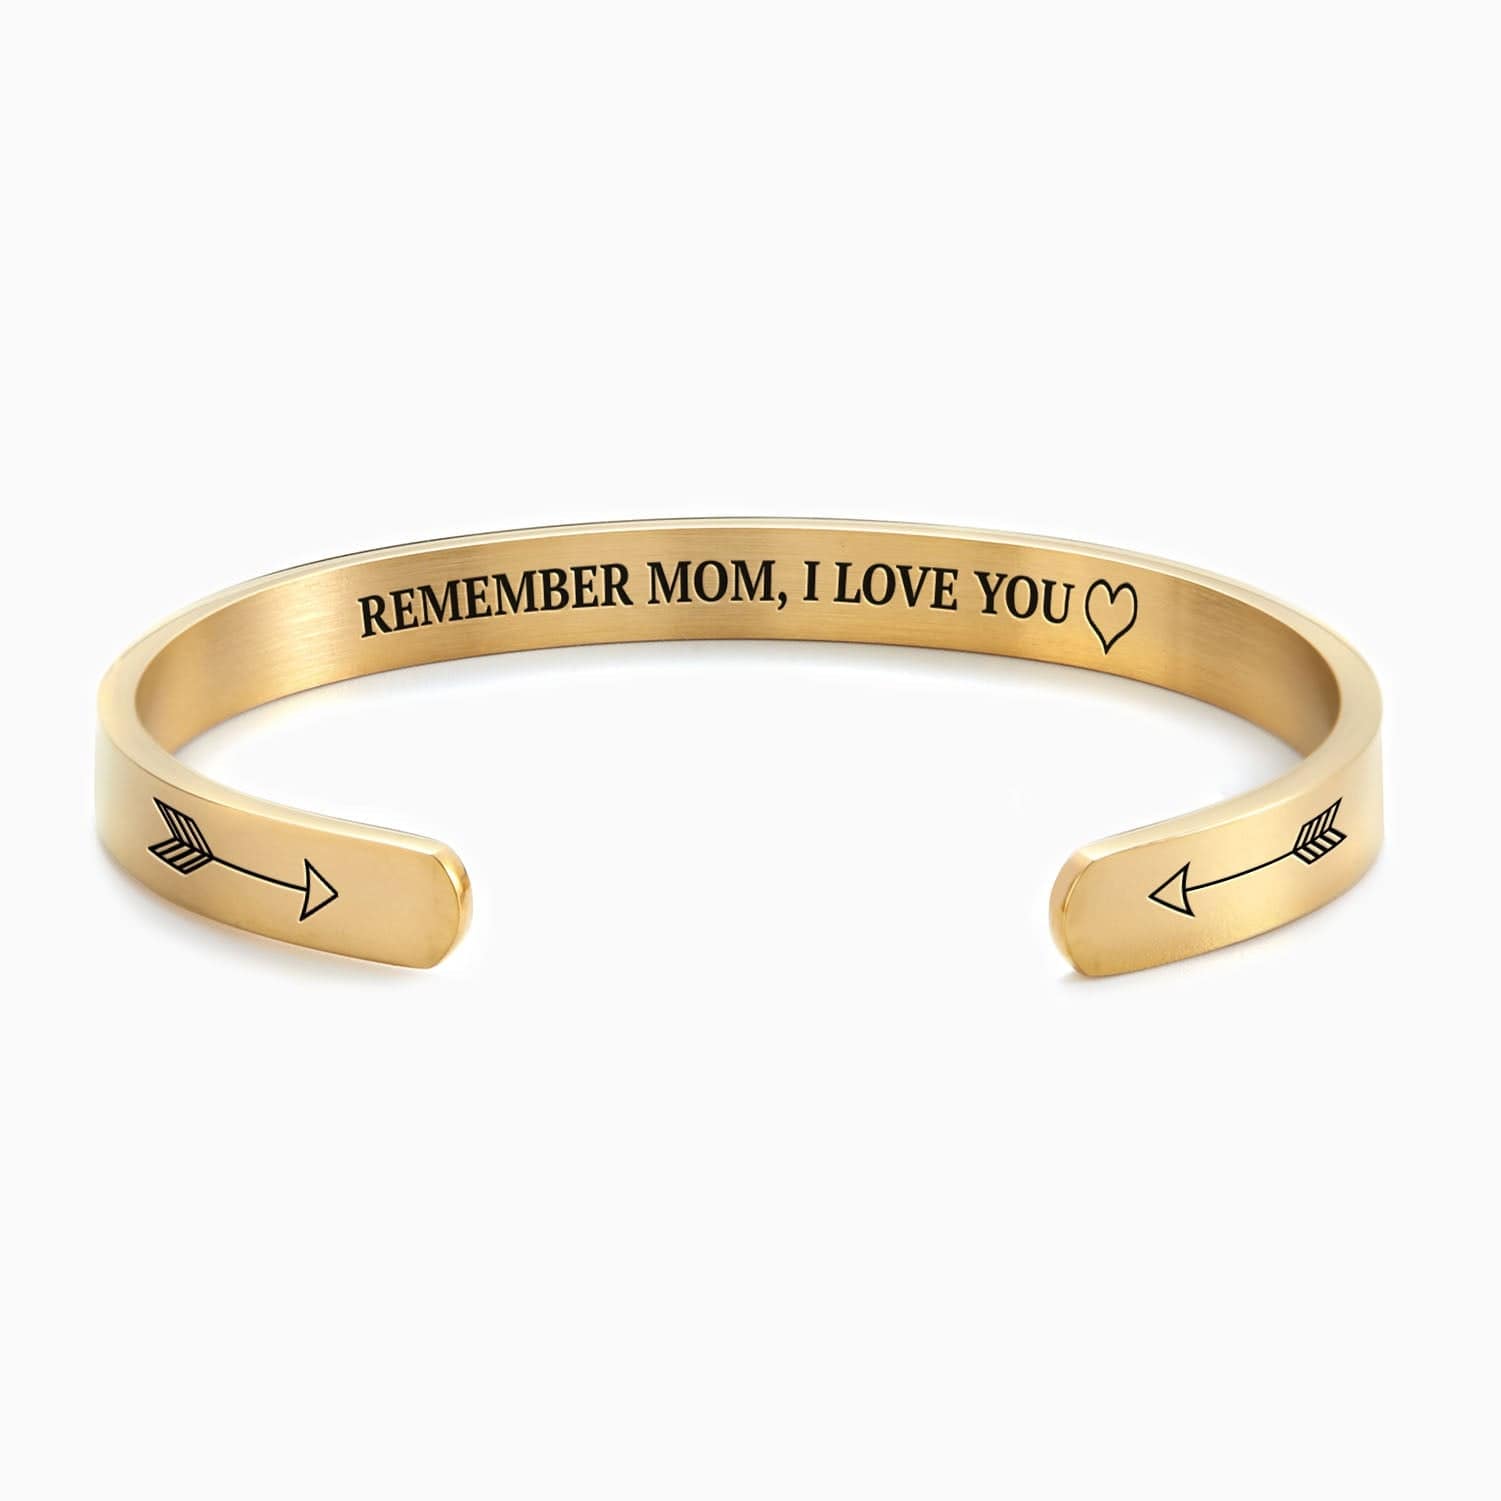 Mother's Day Gift Remember Mom, I Love You Personalizable Cuff bangle Bracelet 18k Gold Plated Bracelet For Woman MelodyNecklace